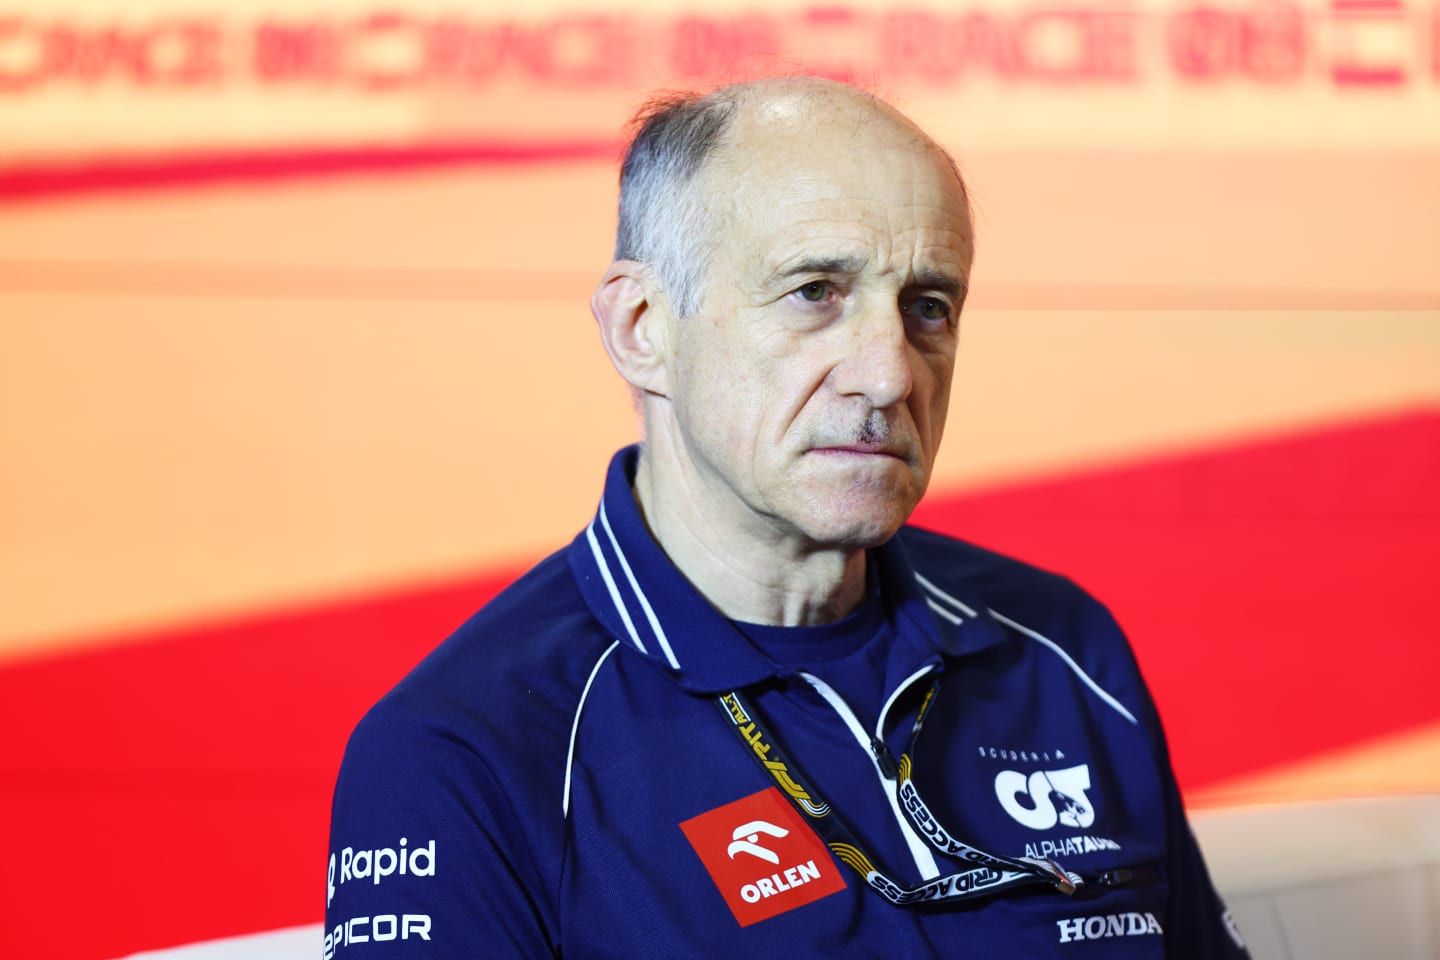 BARCELONA, SPAIN - JUNE 02: Scuderia AlphaTauri Team Principal Franz Tost attends the Team Principals Press Conference during practice ahead of the F1 Grand Prix of Spain at Circuit de Barcelona-Catalunya on June 02, 2023 in Barcelona, Spain. (Photo by Dan Istitene/Getty Images)